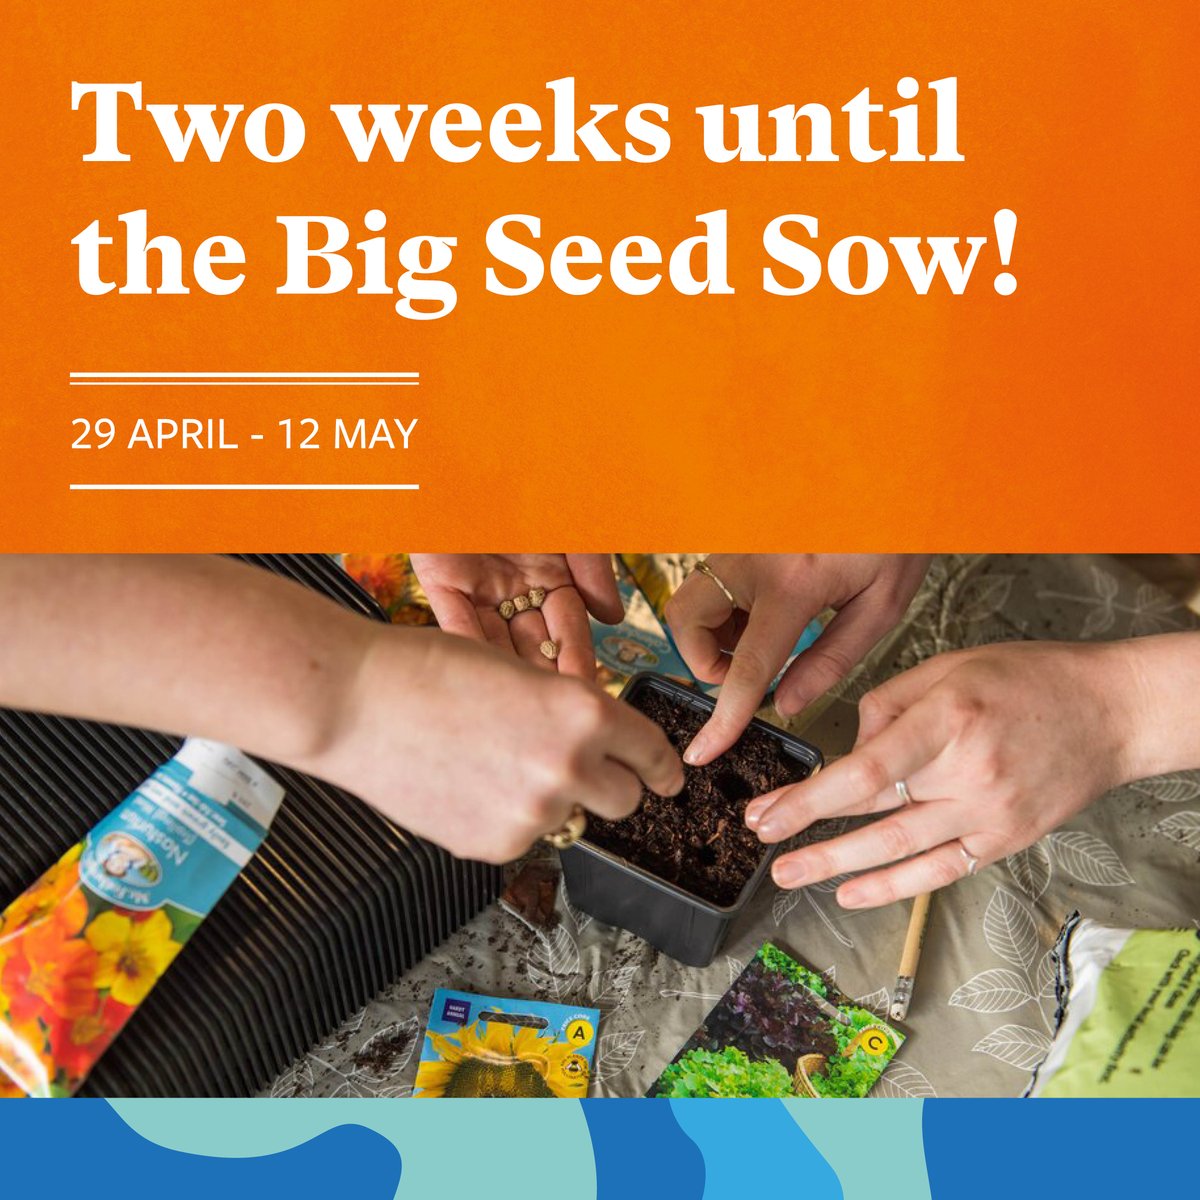 There’s only 2 weeks to go until the #RHSBigSeedSow ⌛🌱 We can’t wait to see how you and your group take part in the Big Seed Sow, 29 April - 12 May! rhs.org.uk/get-involved/g…